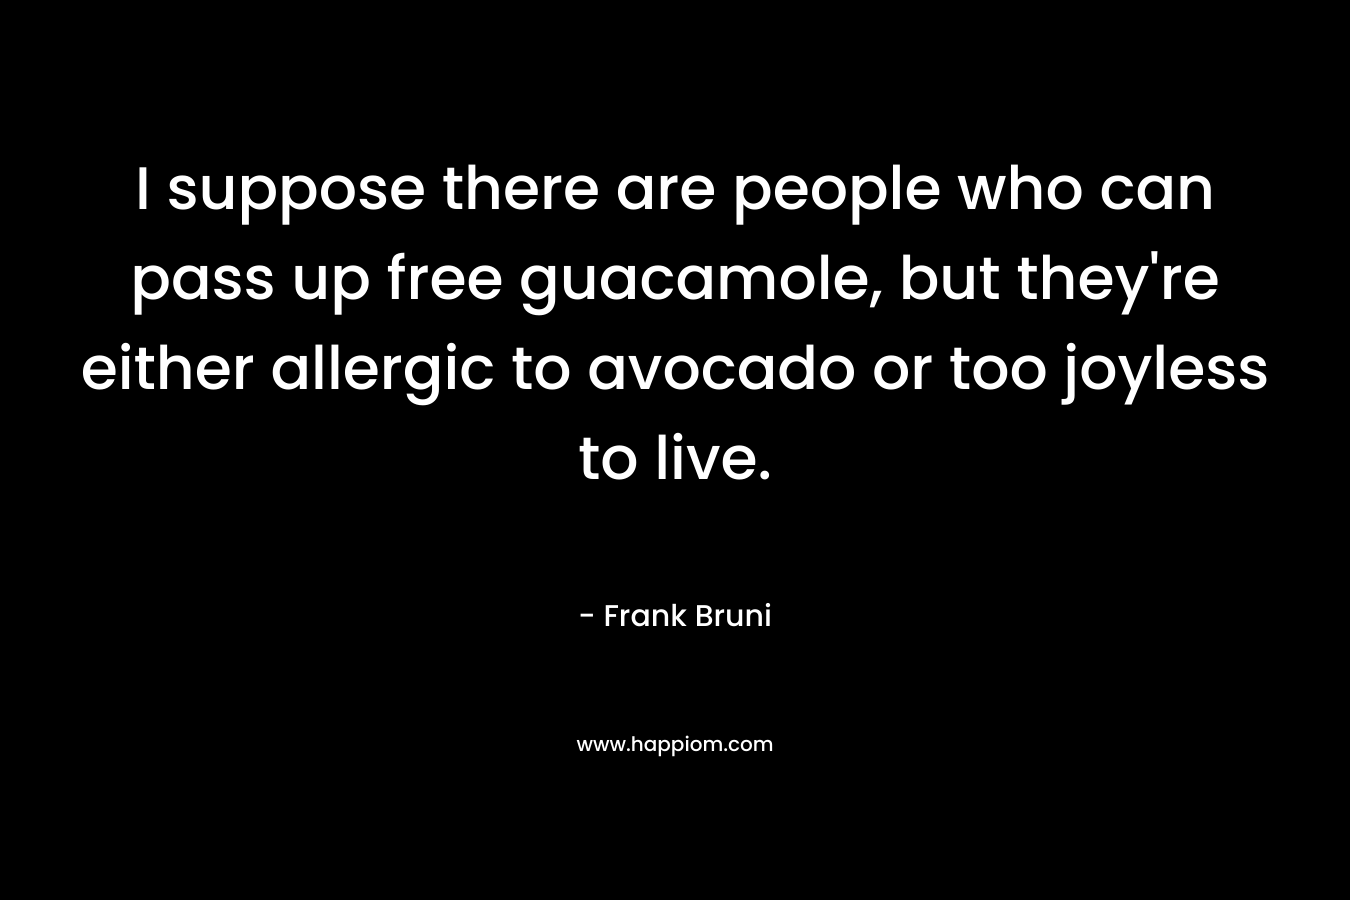 I suppose there are people who can pass up free guacamole, but they're either allergic to avocado or too joyless to live.